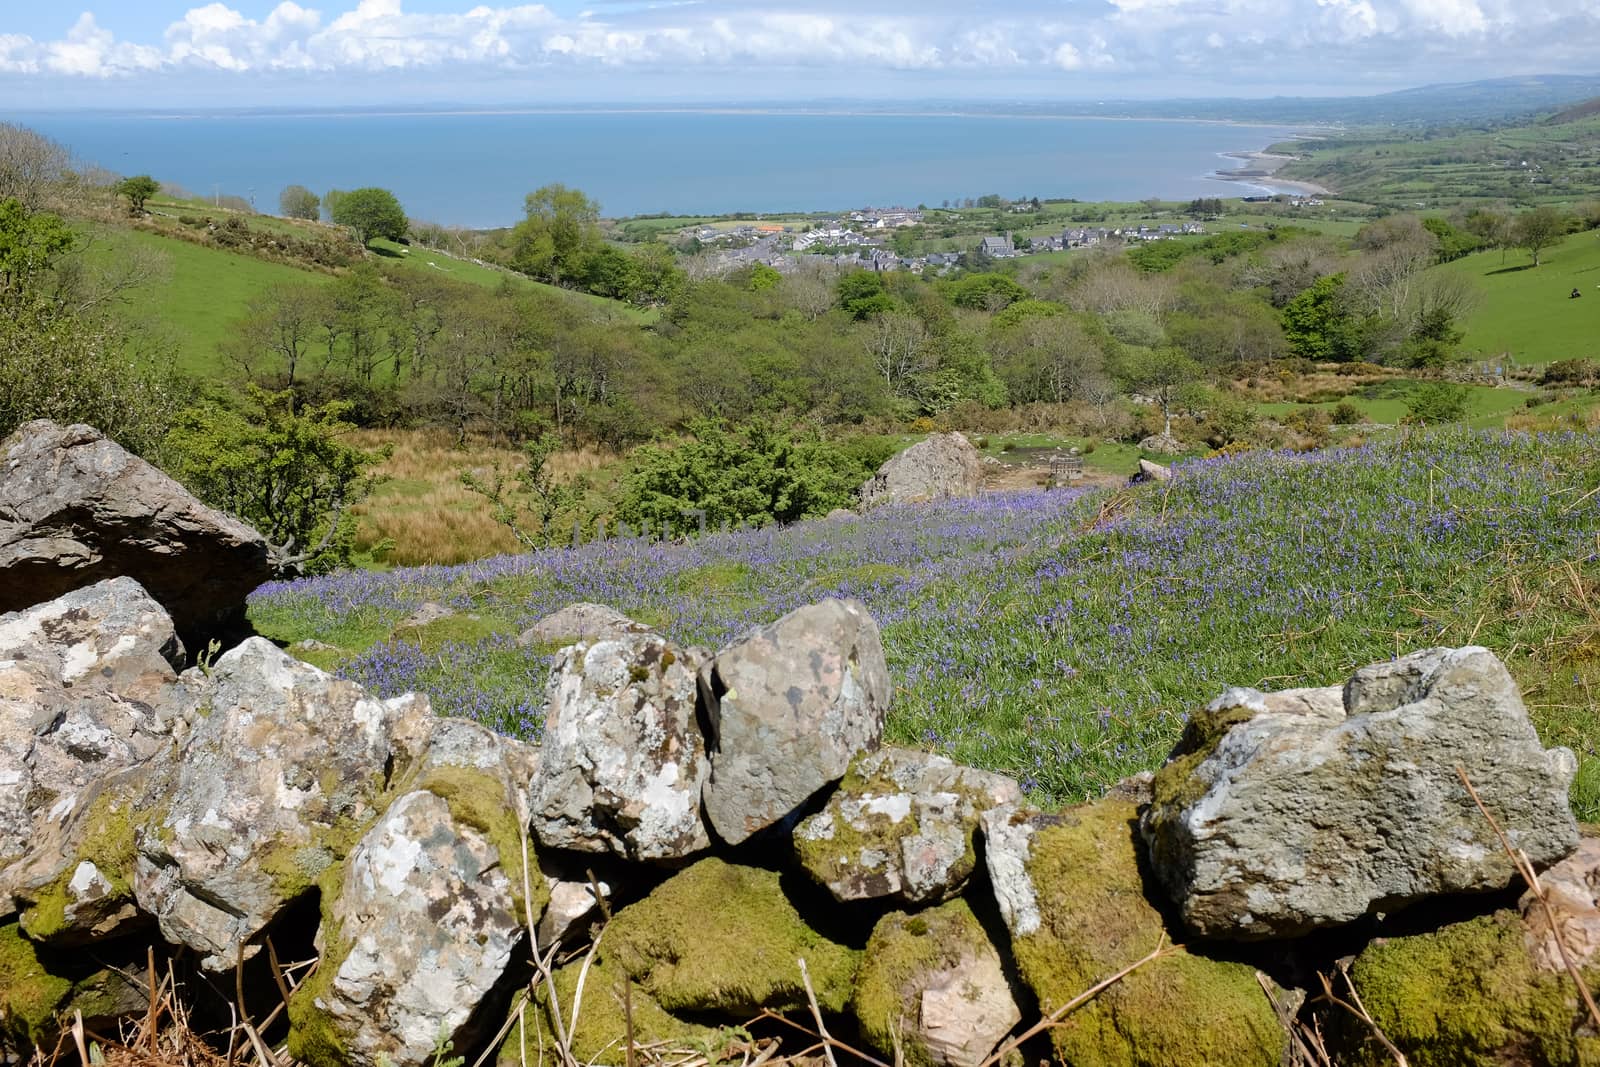 A stone wall and bluebells lead to the Welsh village of Trefor nestled before the Bay of Caernarfon, Lleyn peninsular, Wales, UK.